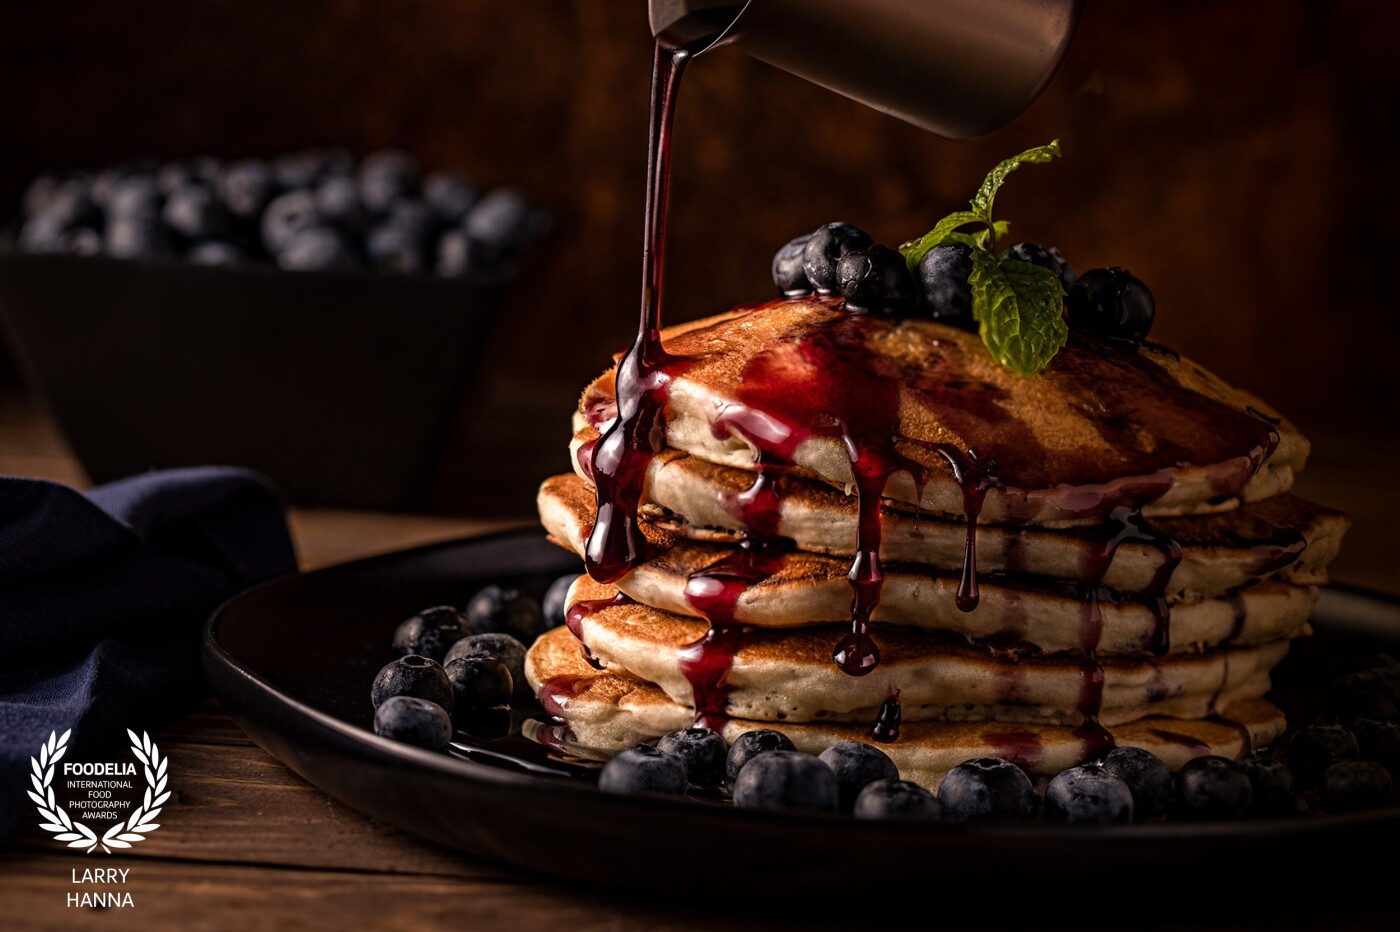 I love a stack of blueberry pancakes in the morning and recently bought some blueberry syrup and loved the way it enhanced the beauty of the pancakes. I decided that I needed to create an image emphasizing the syrup. I created this image in my home utilizing strobe light to freeze the action of the pouring syrup